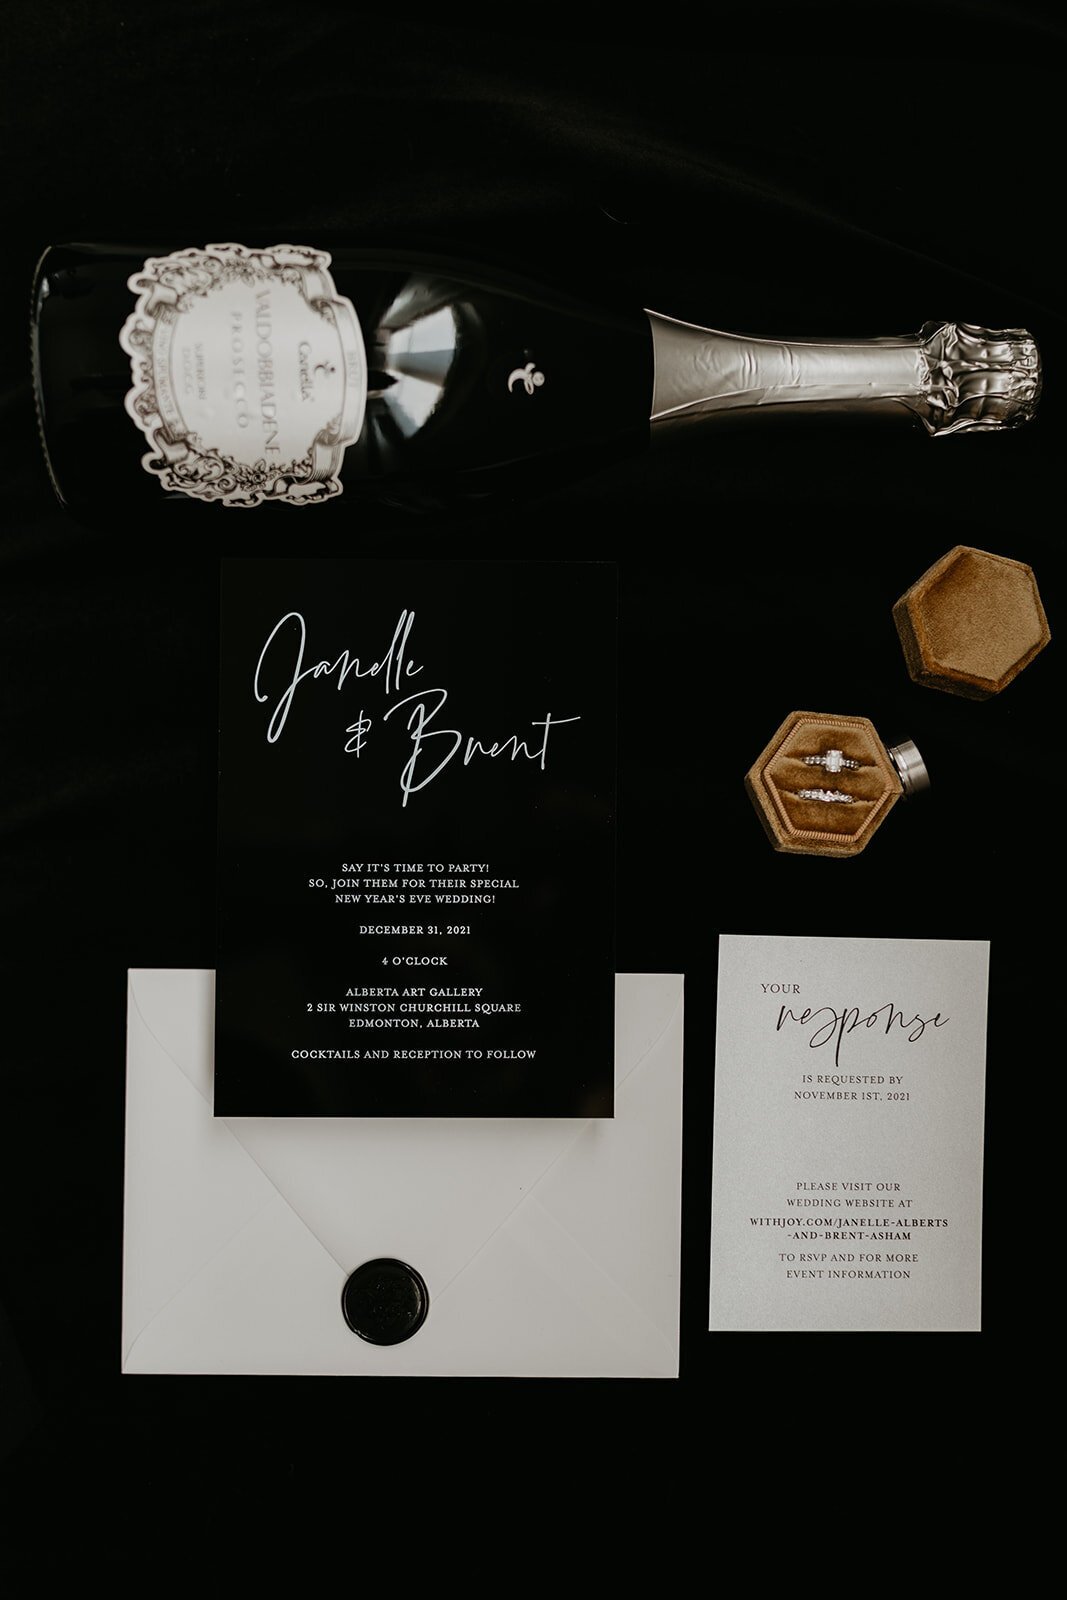 Flat lay of bride's ring with wedding invitation and bottle of champagne.